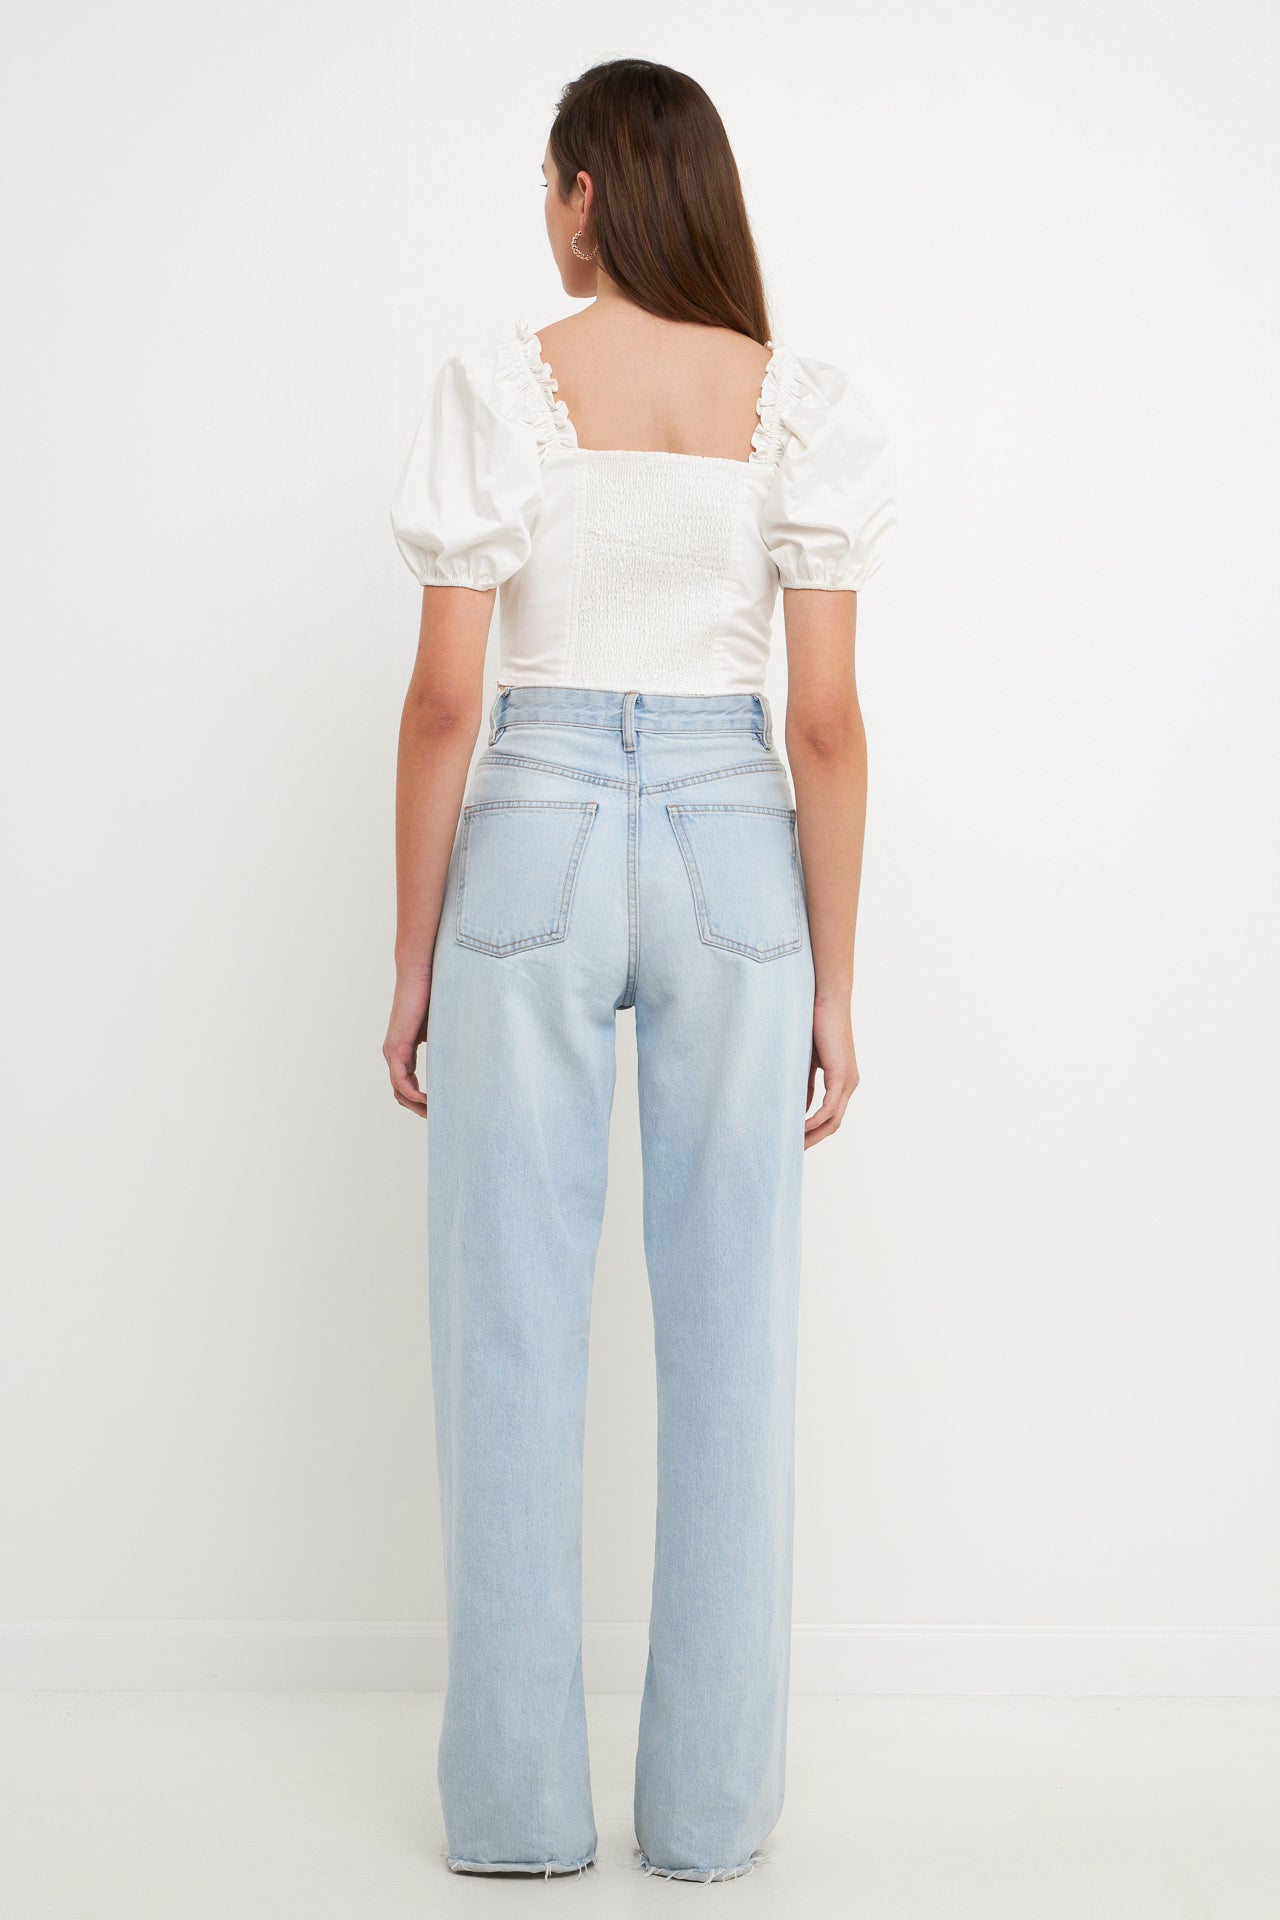 ENDLESS ROSE - Short Puff Sleeve Cropped Top - TOPS available at Objectrare